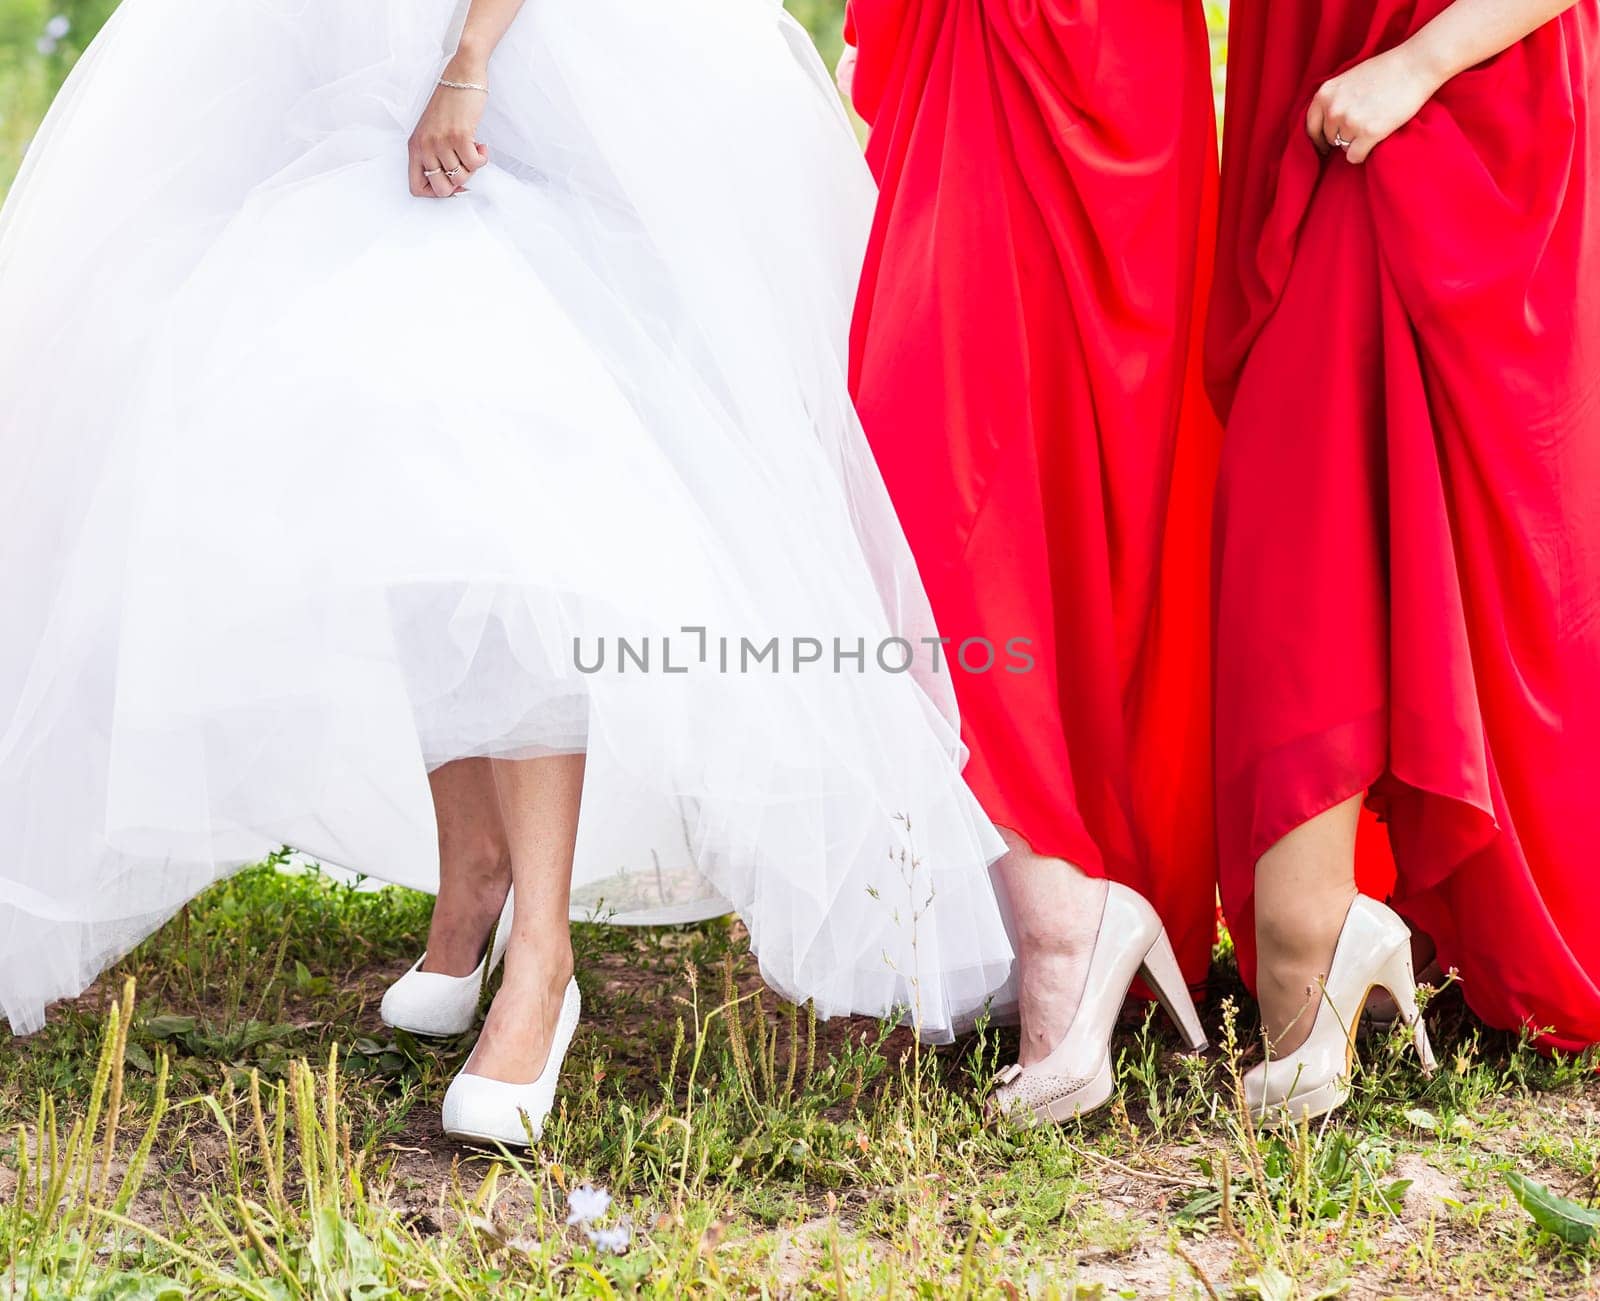 Bride and bridesmaids show off their shoes at wedding. by Satura86